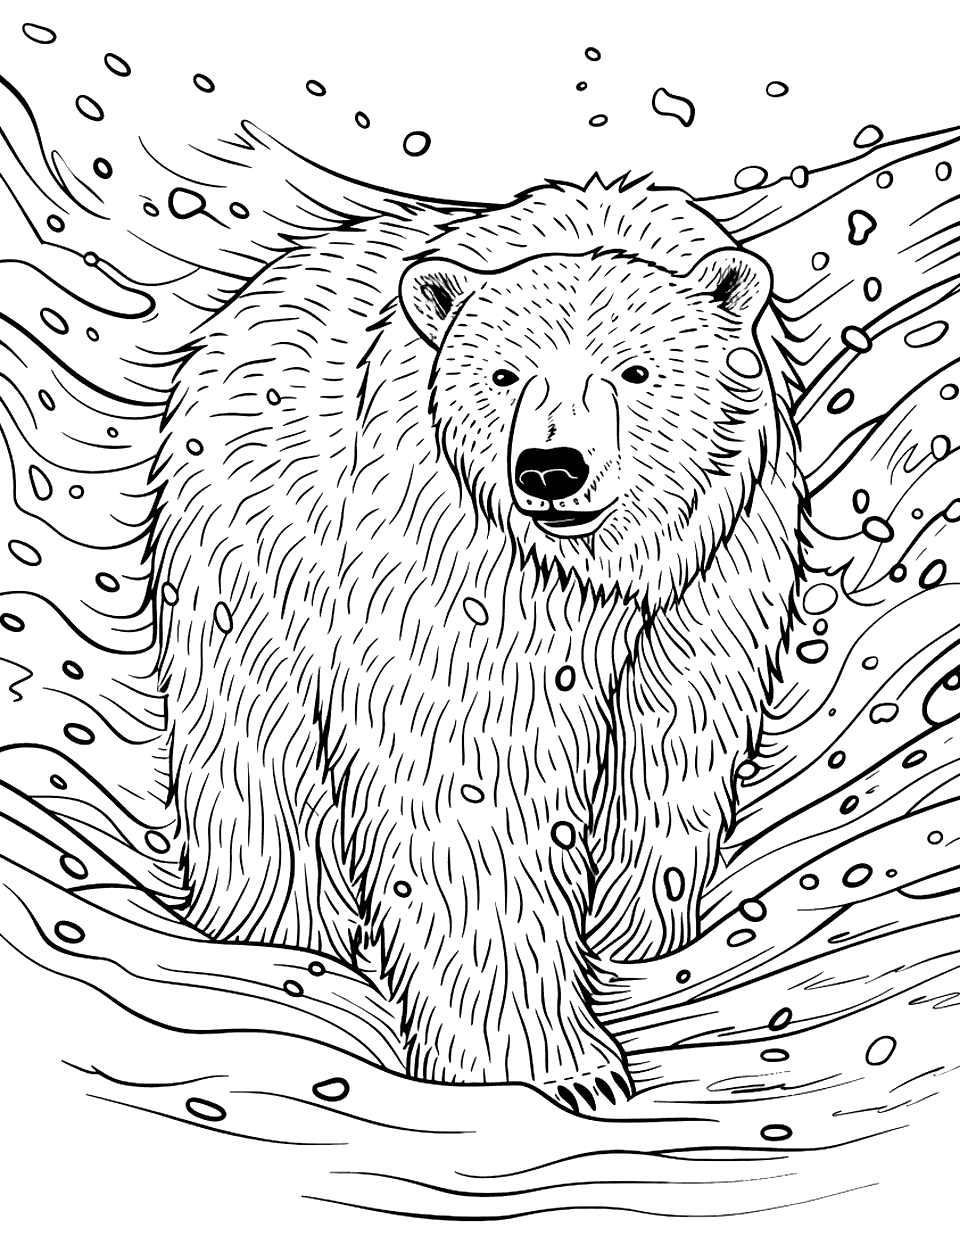 Polar Bear in a Snowstorm Coloring Page - A polar bear bracing against the wind in a blustery snowstorm.